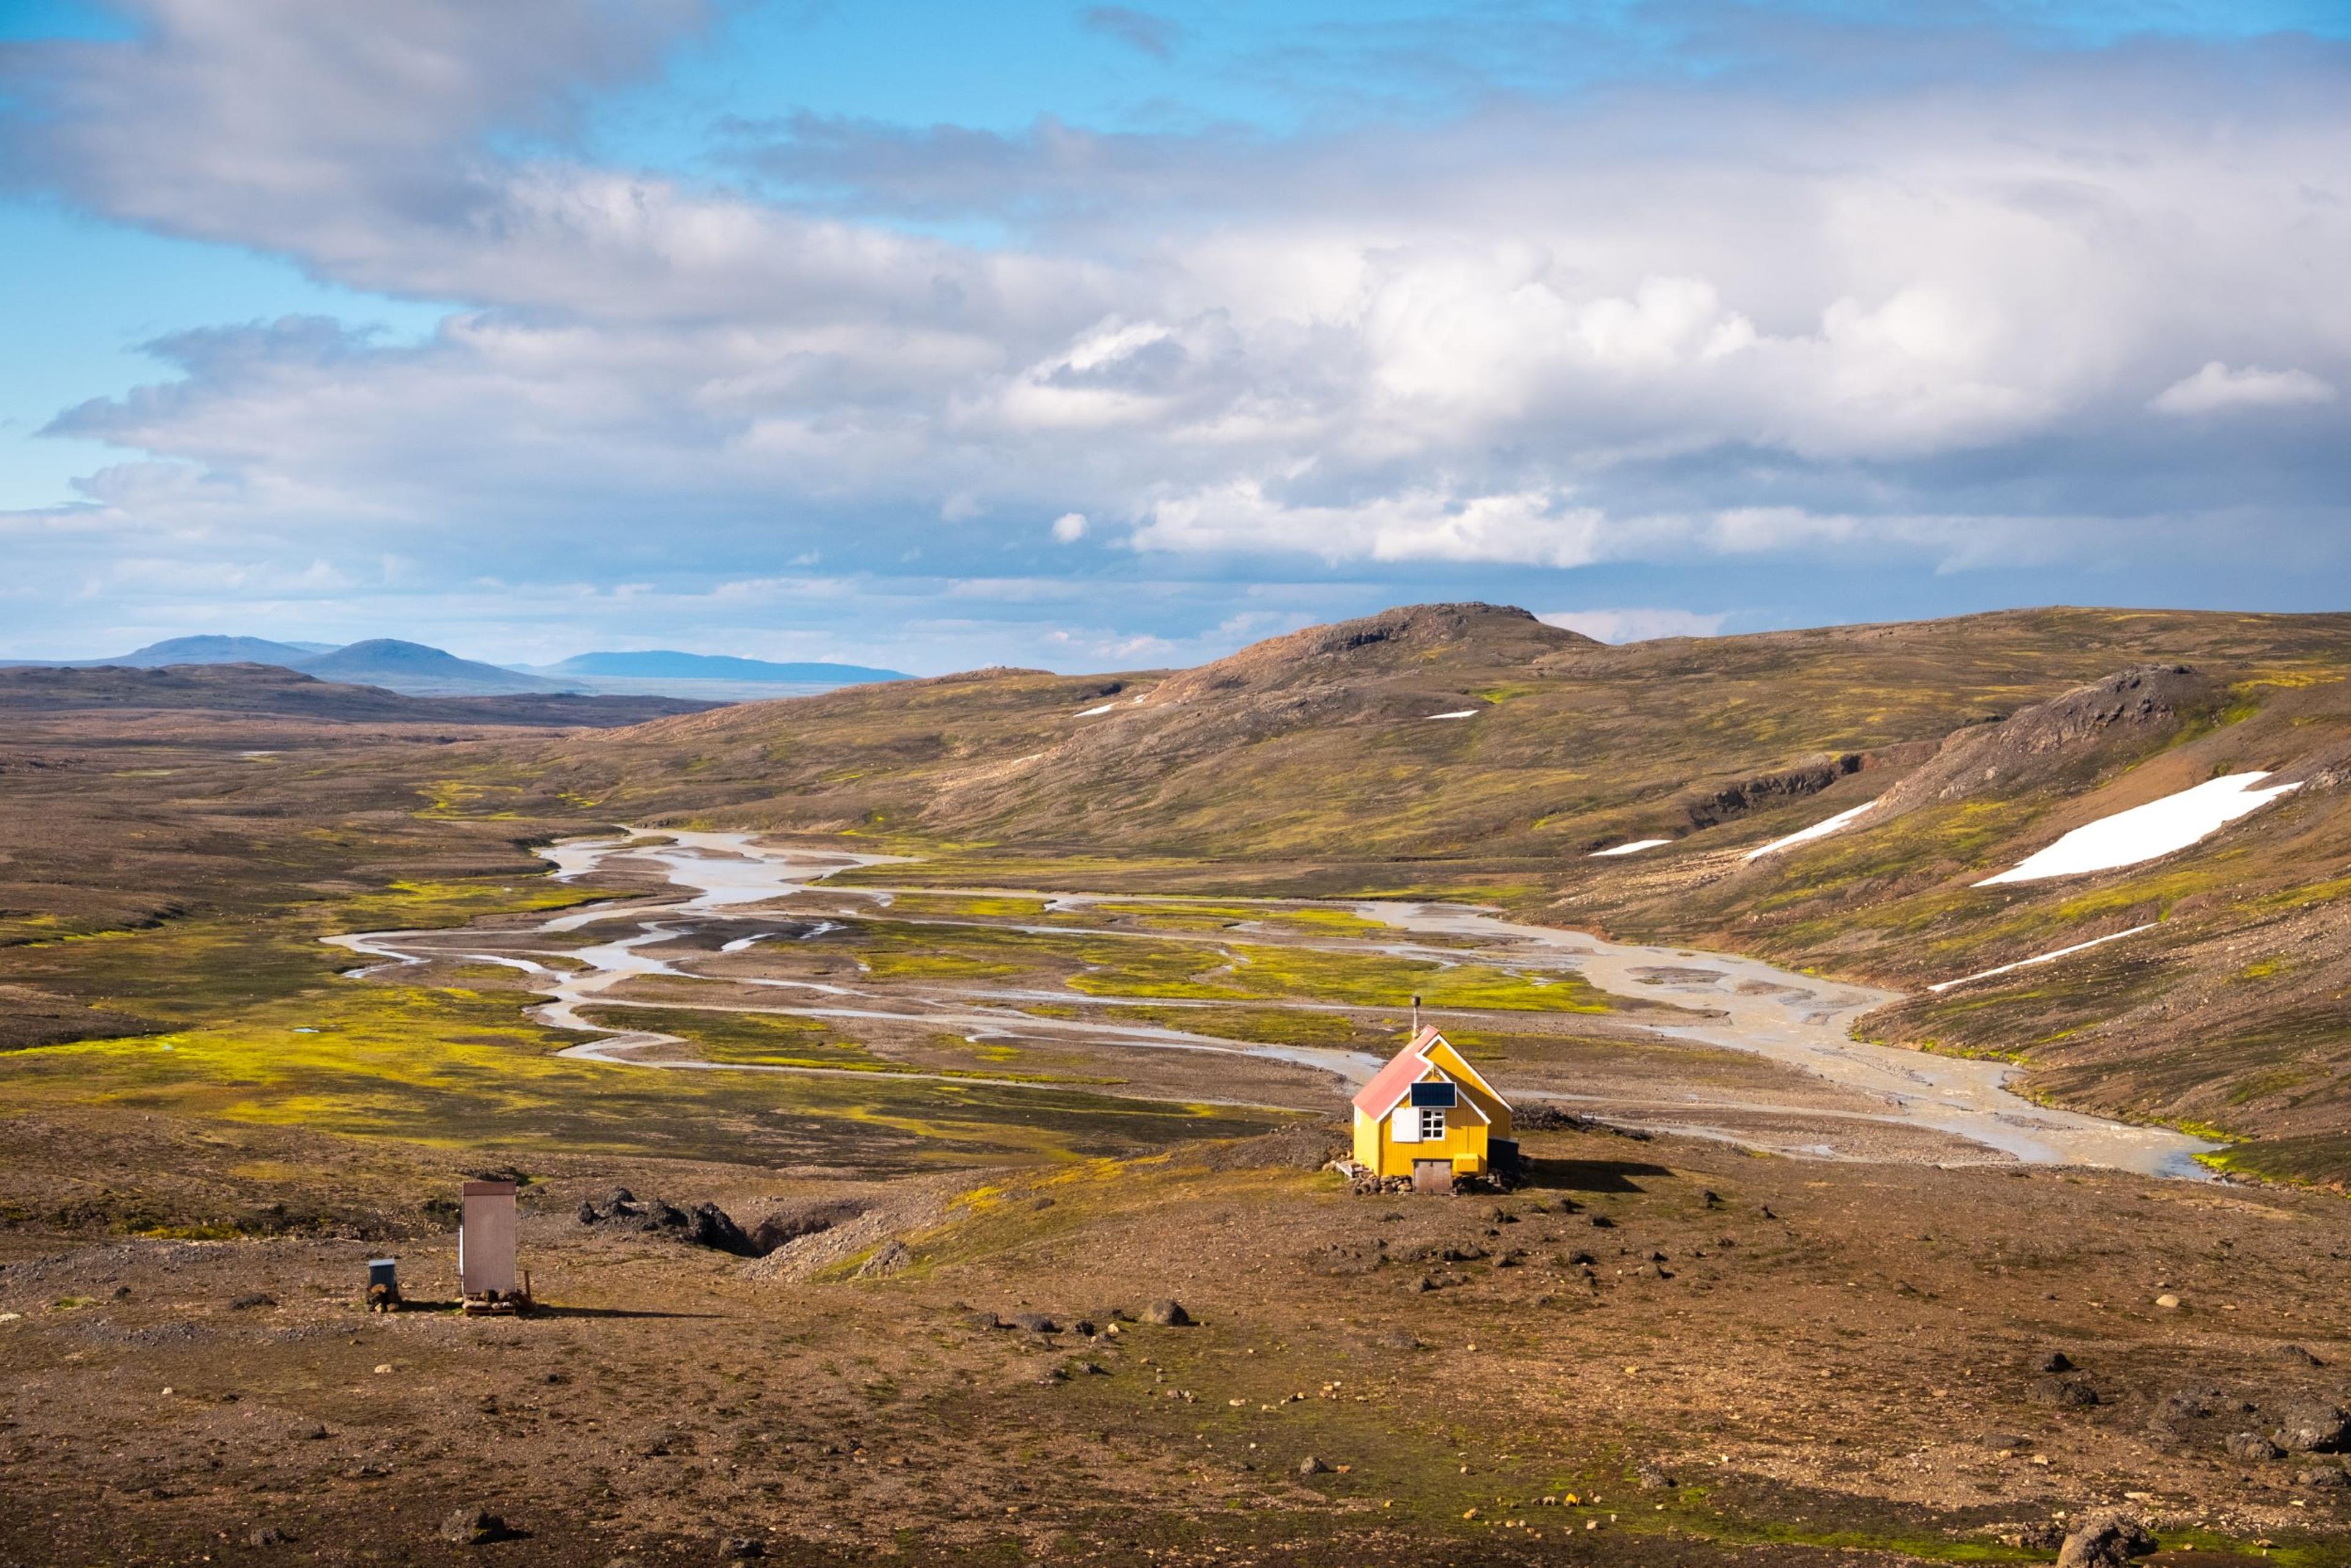 Small yellow hut nestled in a pristine and remote natural wilderness setting.